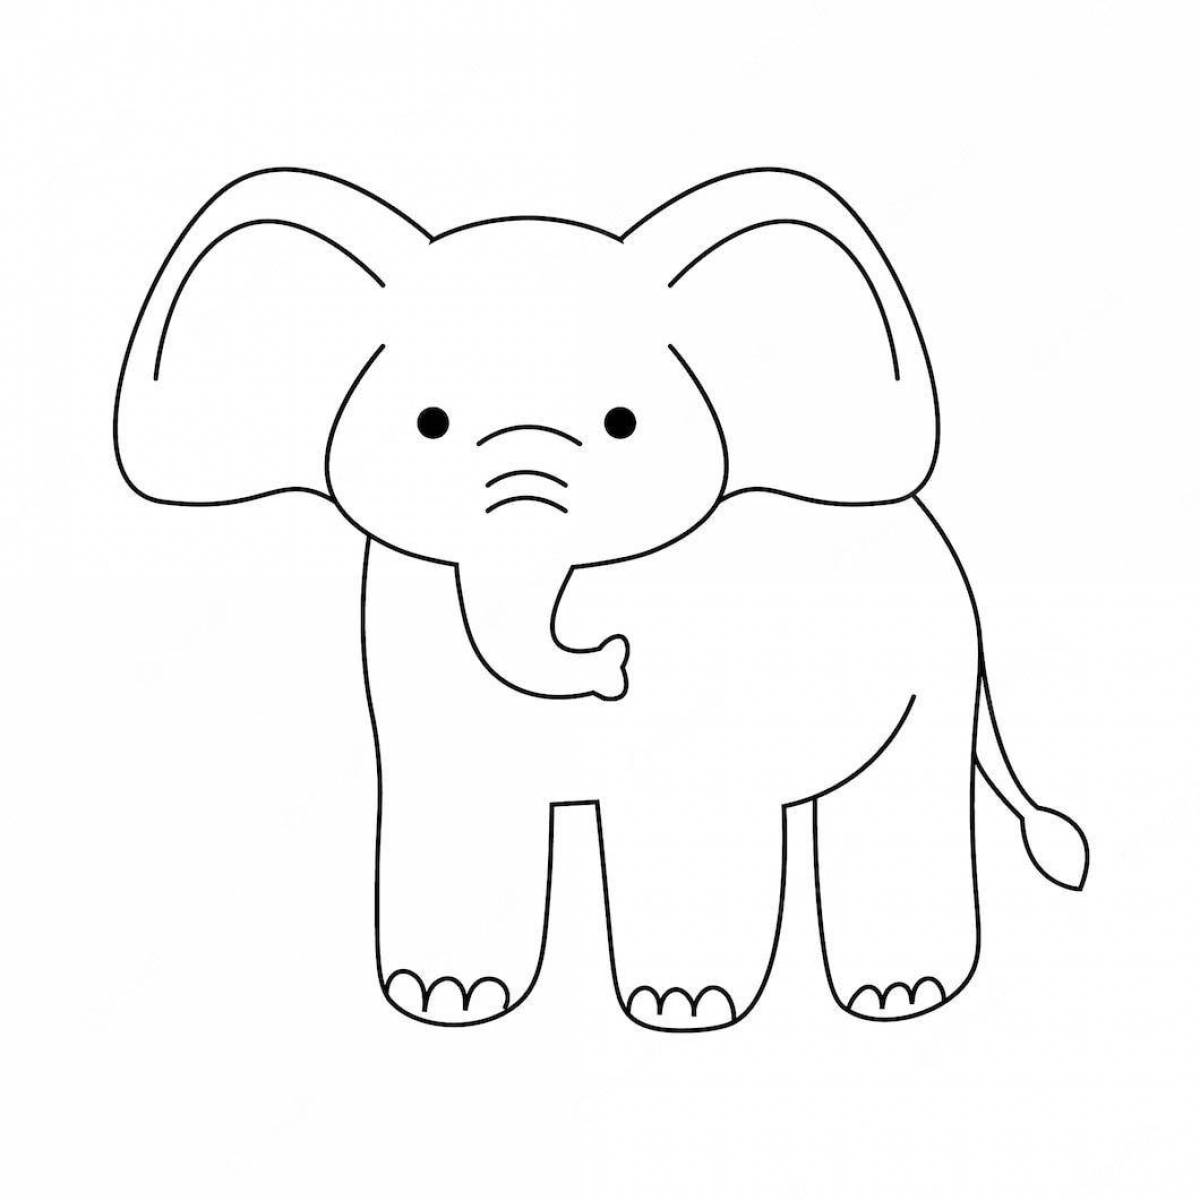 Outstanding elephant coloring book for 3-4 year olds